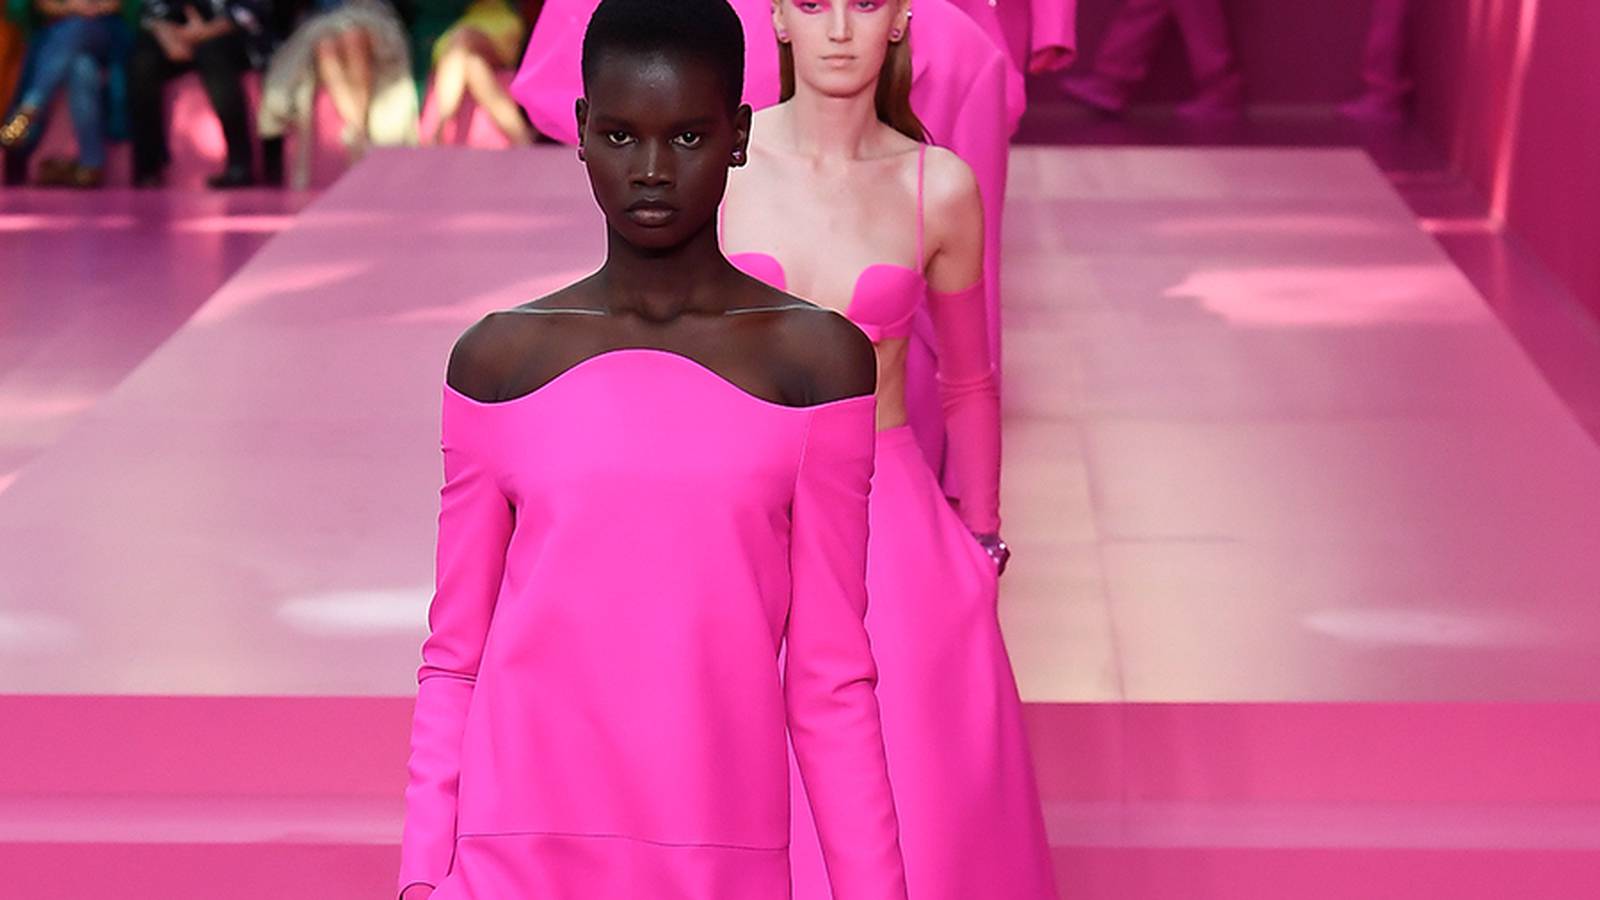 Pink Takeover: The Hottest Color of 2022 — NOW MAGAZINE